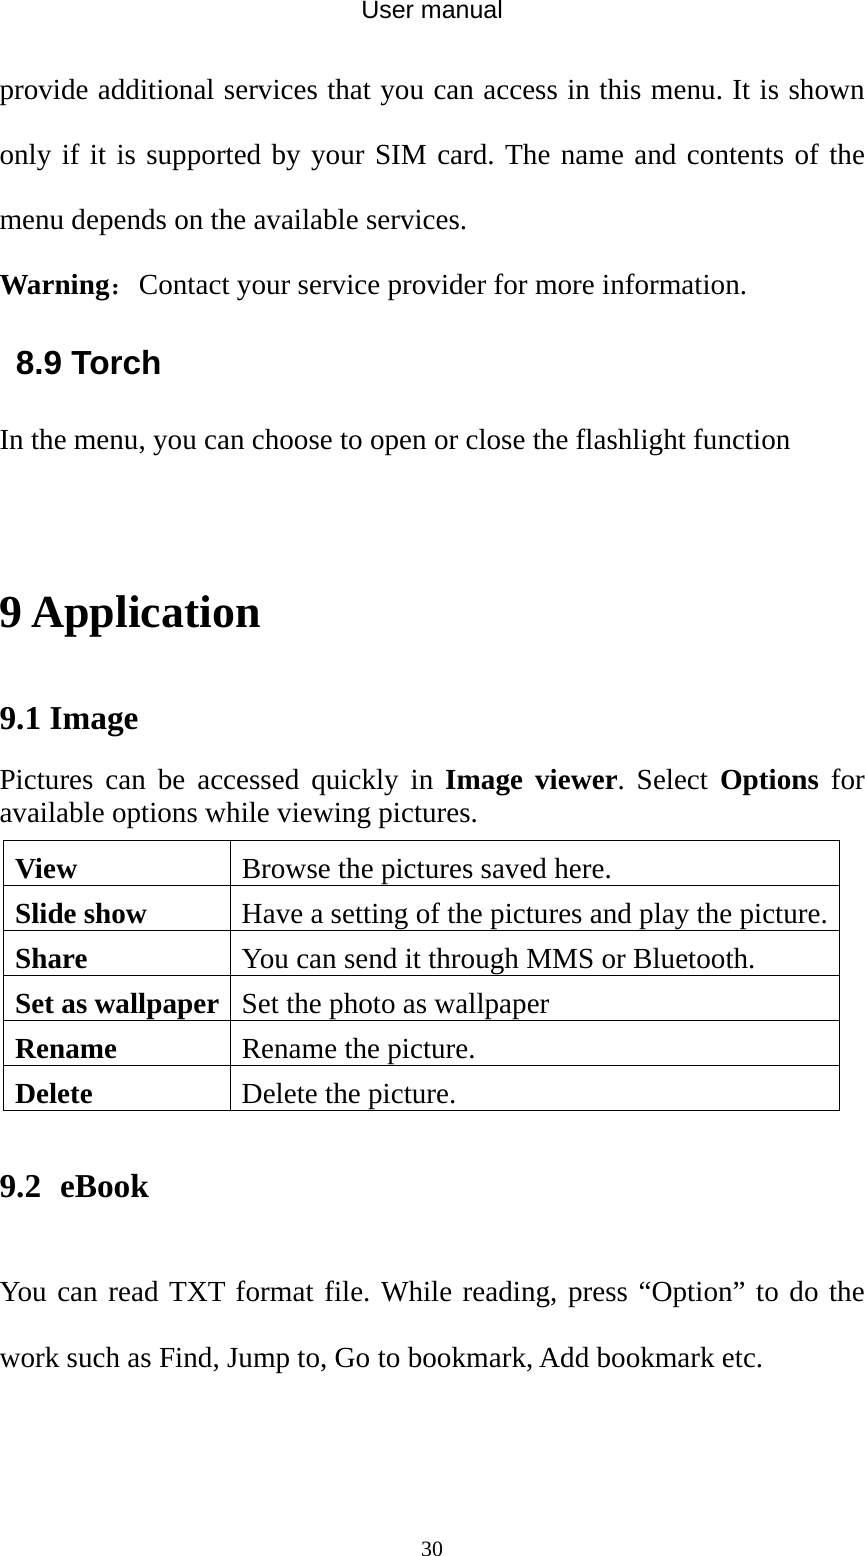 User manual  30provide additional services that you can access in this menu. It is shown only if it is supported by your SIM card. The name and contents of the menu depends on the available services. Warning：Contact your service provider for more information. 8.9 Torch In the menu, you can choose to open or close the flashlight function  9 Application 9.1 Image   Pictures can be accessed quickly in Image viewer. Select Options for available options while viewing pictures. View Browse the pictures saved here. Slide show  Have a setting of the pictures and play the picture. Share  You can send it through MMS or Bluetooth. Set as wallpaper Set the photo as wallpaper Rename Rename the picture. Delete Delete the picture. 9.2   eBook You can read TXT format file. While reading, press “Option” to do the work such as Find, Jump to, Go to bookmark, Add bookmark etc. 